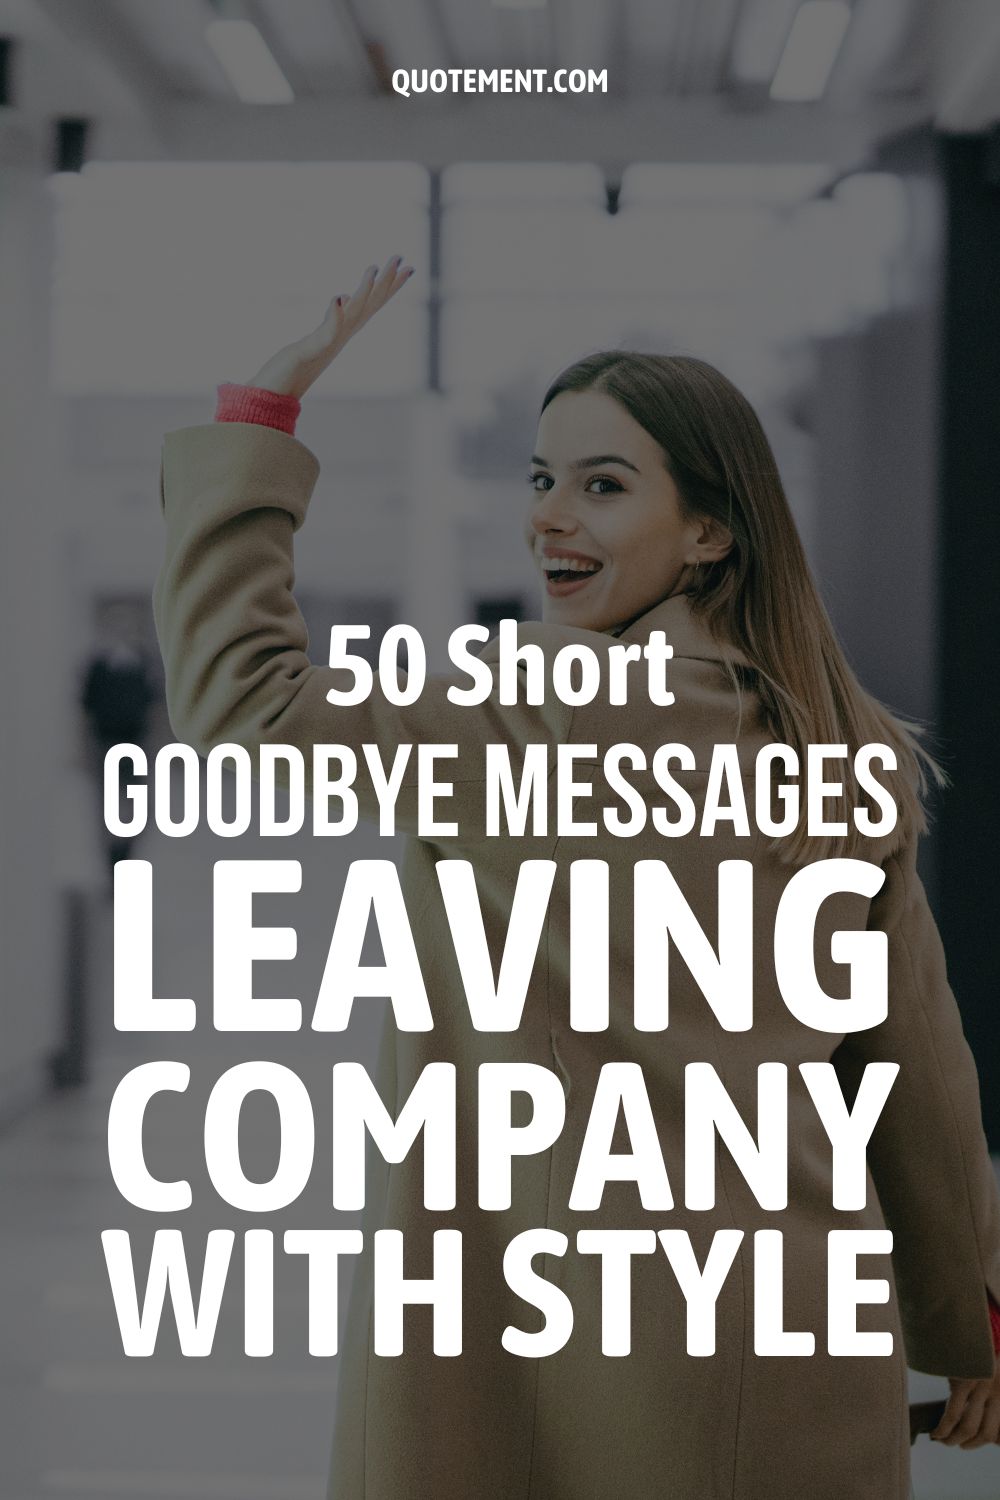 50 Short Goodbye Messages Leaving Company With Style pinterst